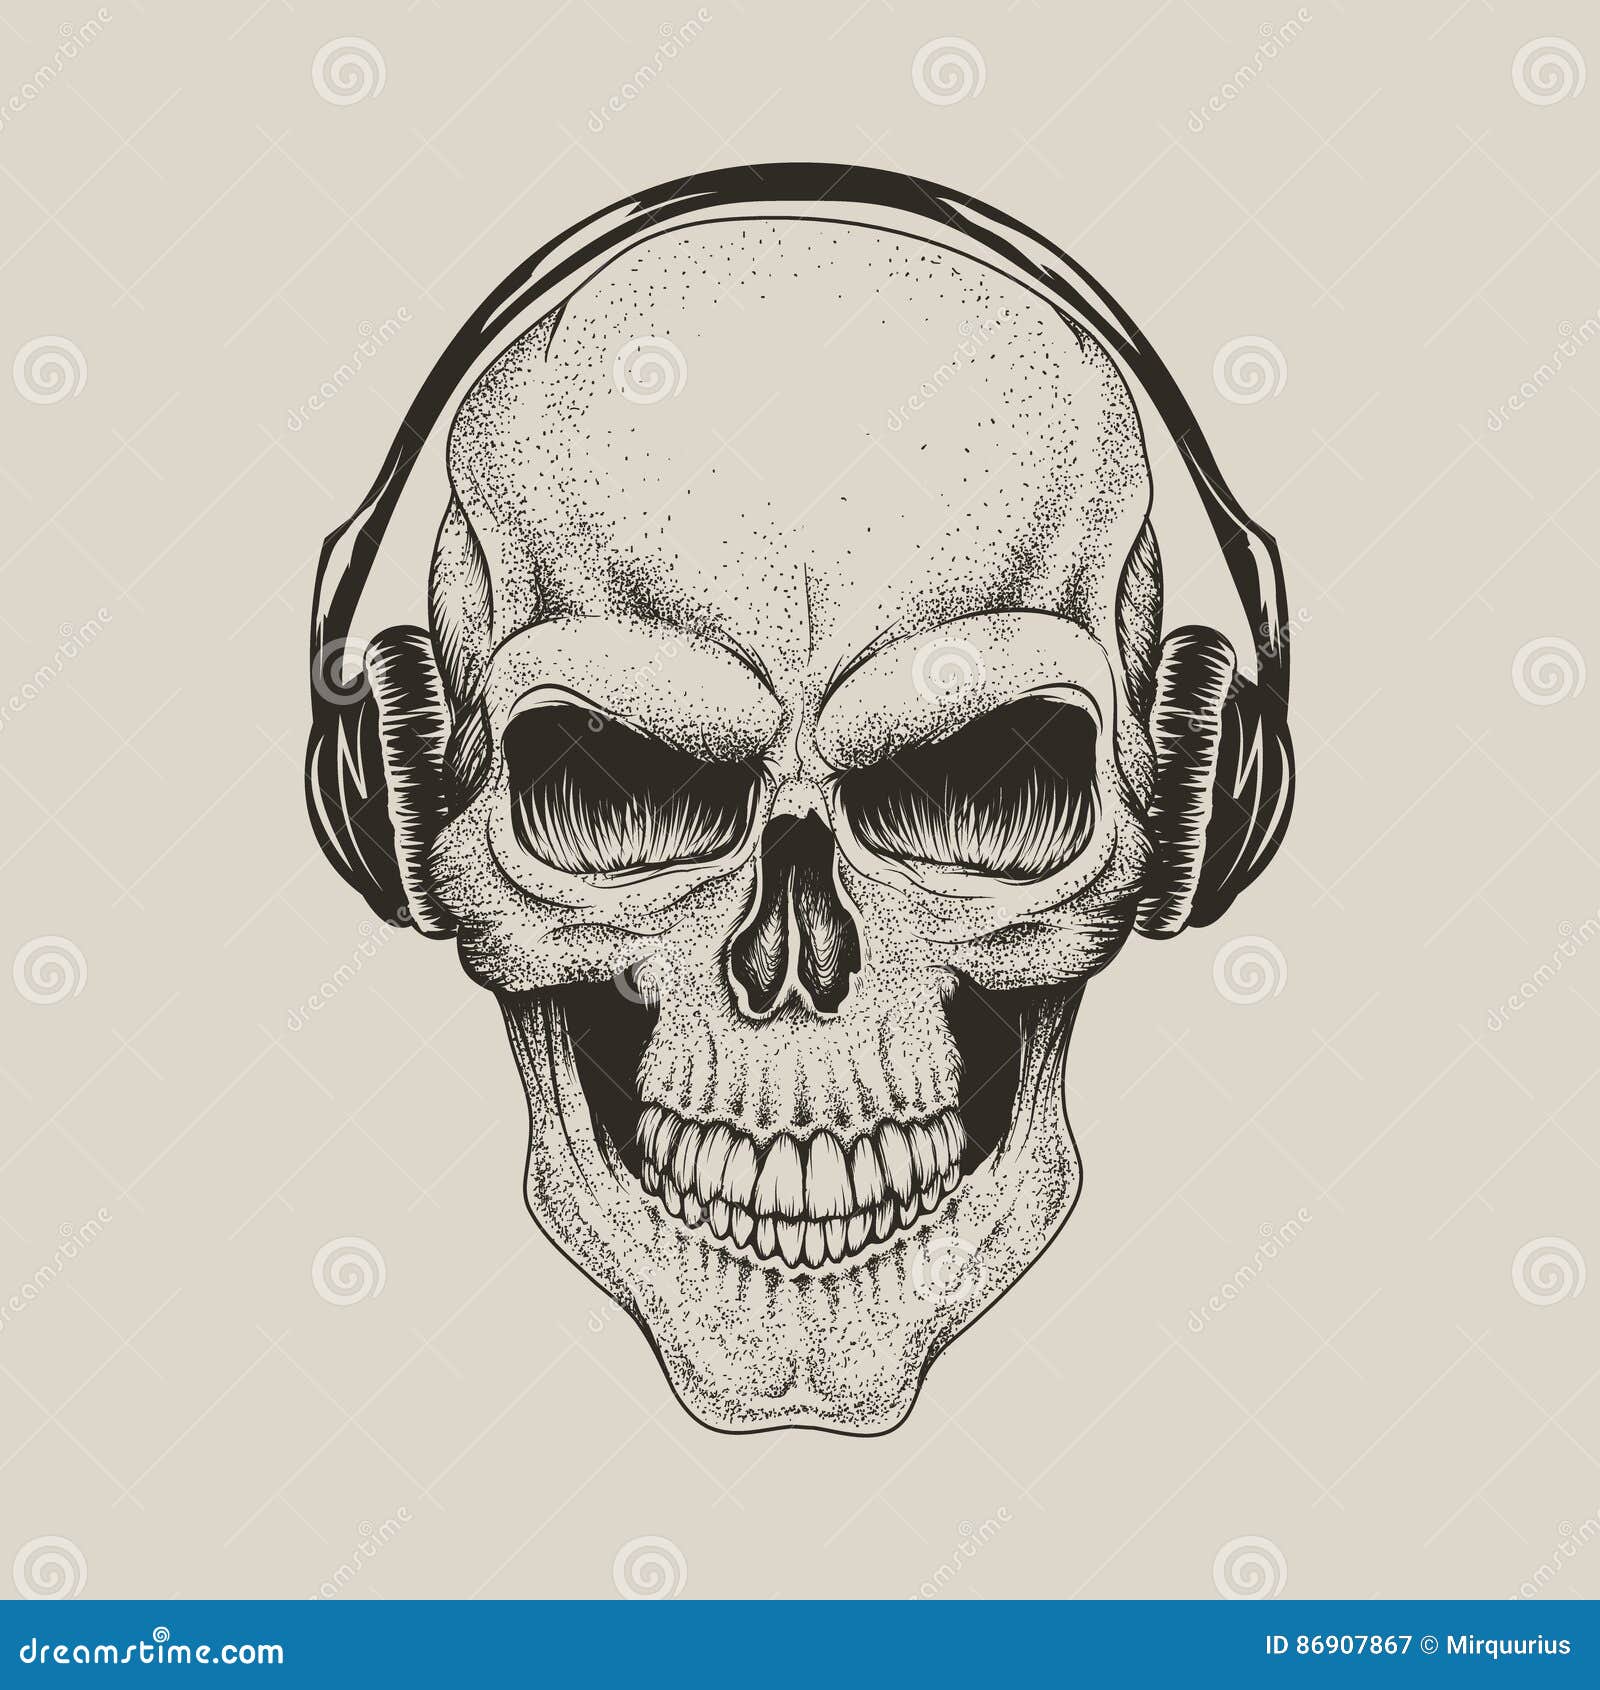 Cool Vector Rock Music Skull with Headphones for Tshirt Emblem Logo  Tattoo Sketch Patch Stock Vector  Illustration of greeting jazz  140445188